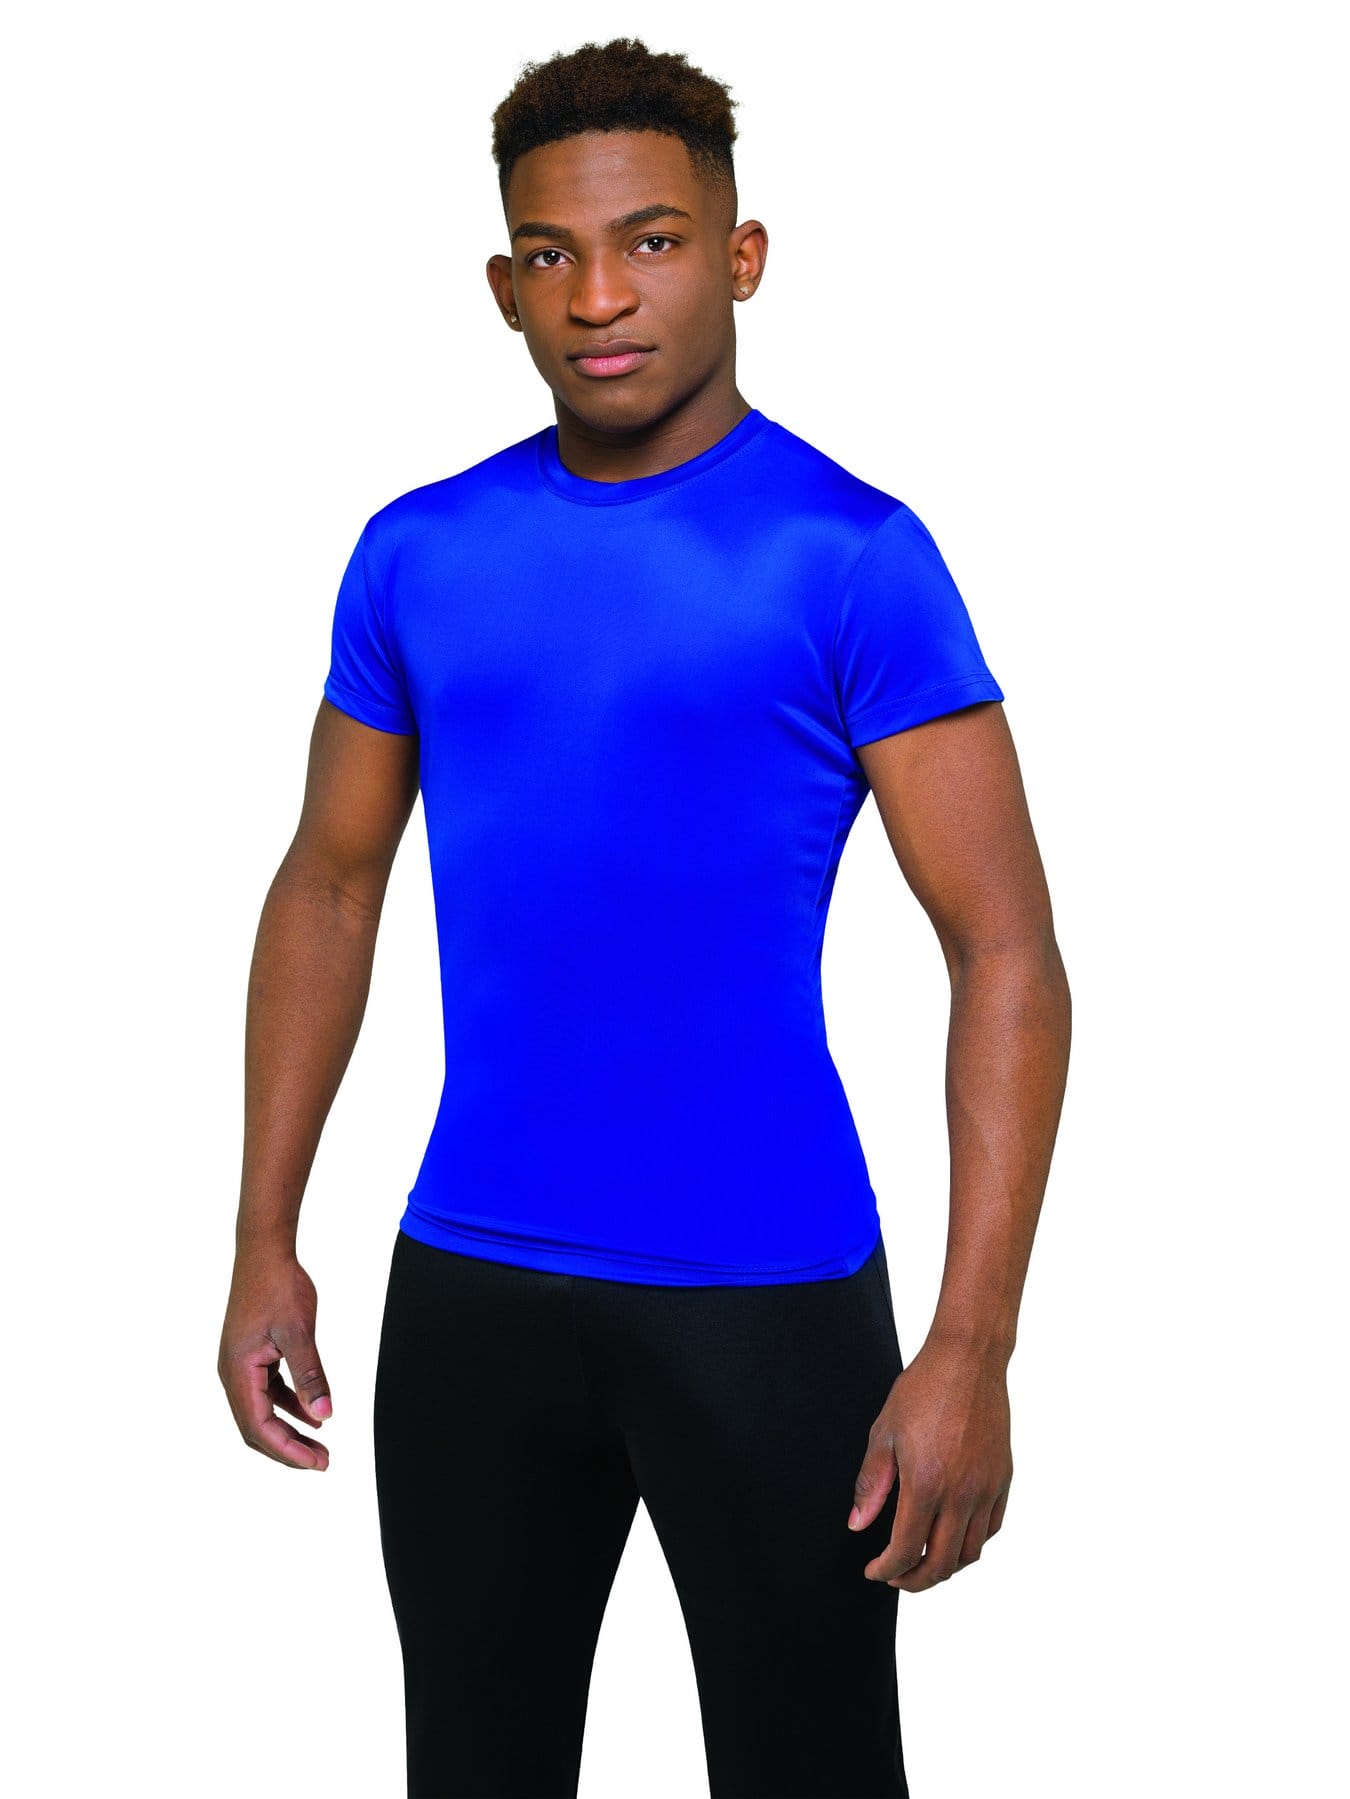 Styleplus Corelements Cool Short Sleeve Compression Shirts for Color Guard,  Band and Percussion Uniforms - Drillcomp, Inc.